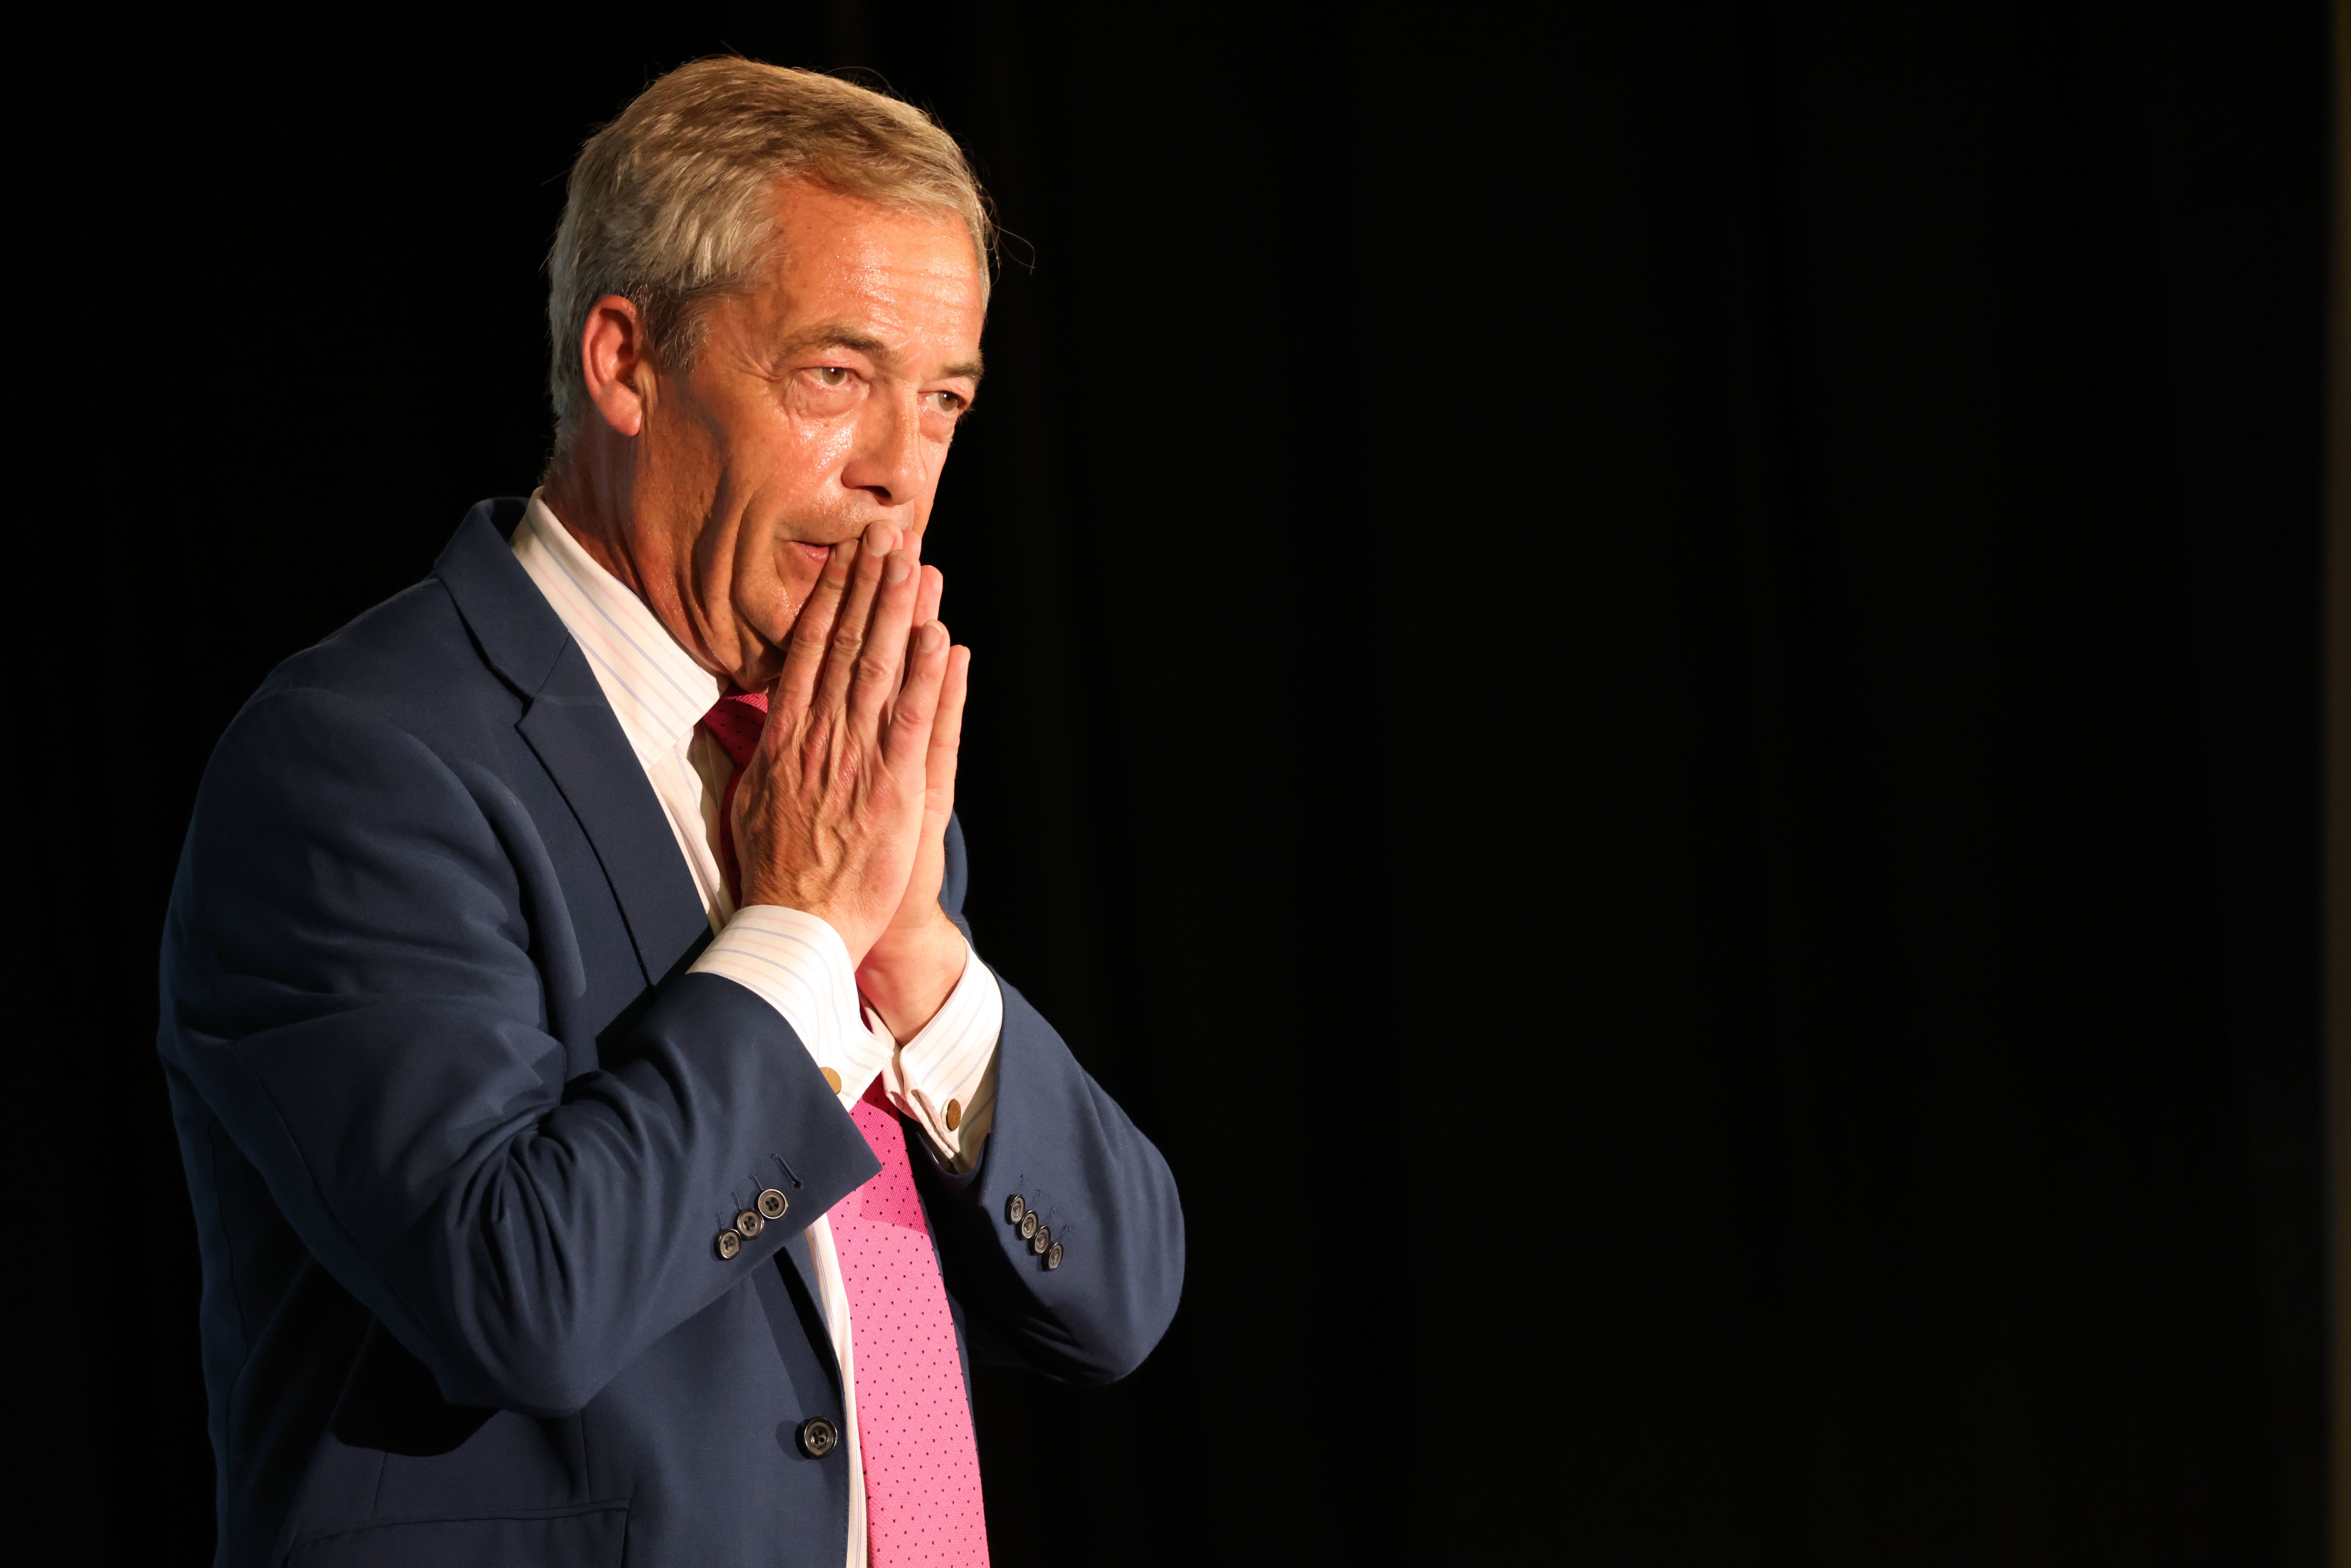 clacton, conspiracy theories, nigel farage, general election, tory, alastair campbell, bad actors or conspiracy theories - the inside story of farage’s battle for clacton